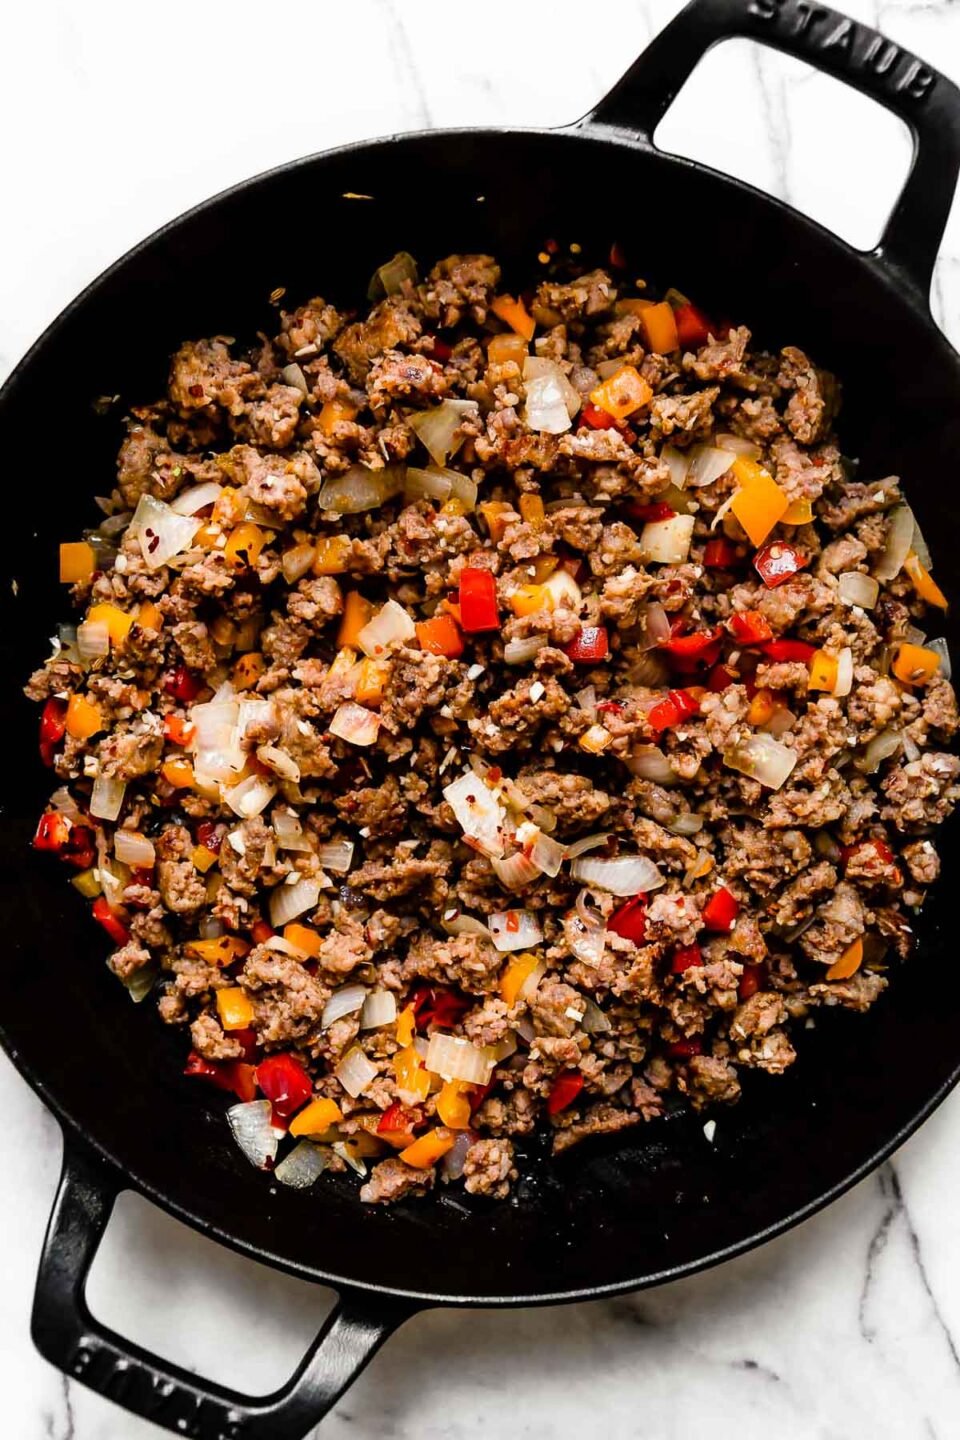 Crumbled and browned Italian sausage and softened bell pepper and onion fill a large black Staub double handled skillet. The skillet sits atop a white and gray marble surface.